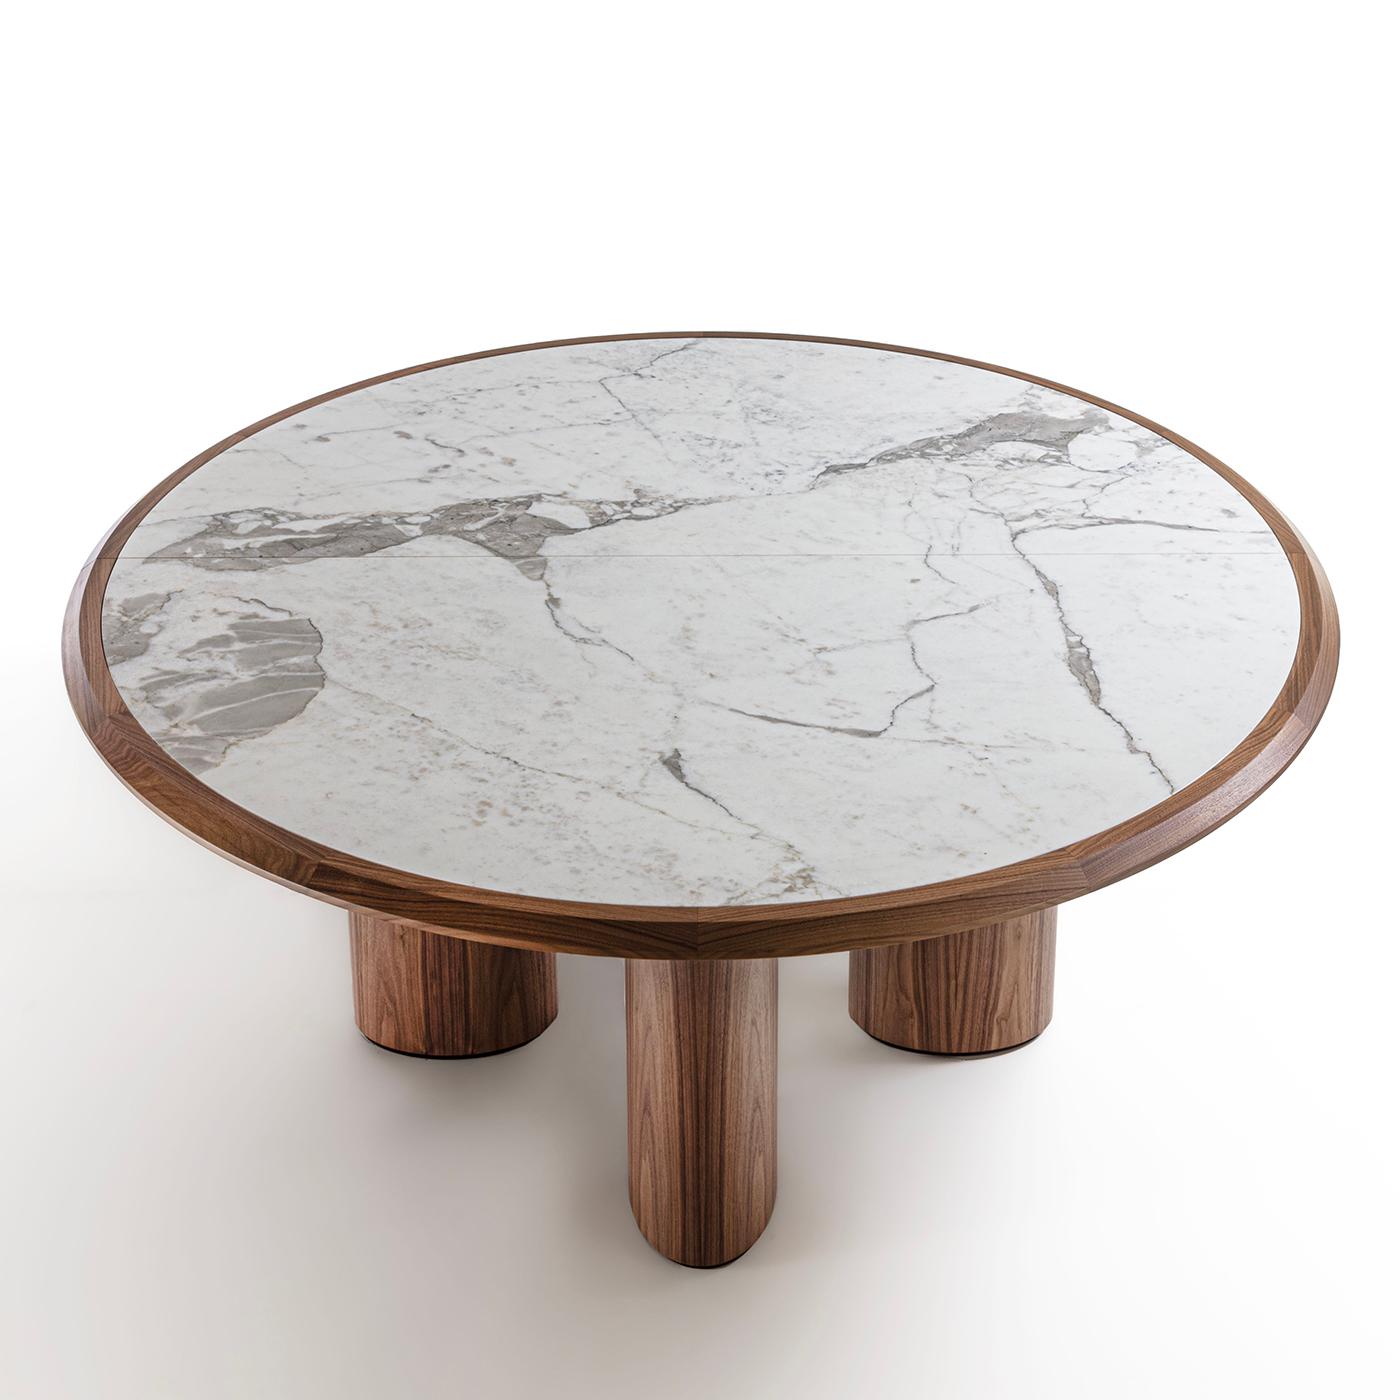 Geometric volumes made unique by the use of splendid natural materials distinguish this superb table of modern inspiration. Majestic addition to a dining room, it boasts a solid Canaletto walnut structure with four elliptic-cut legs and a circular